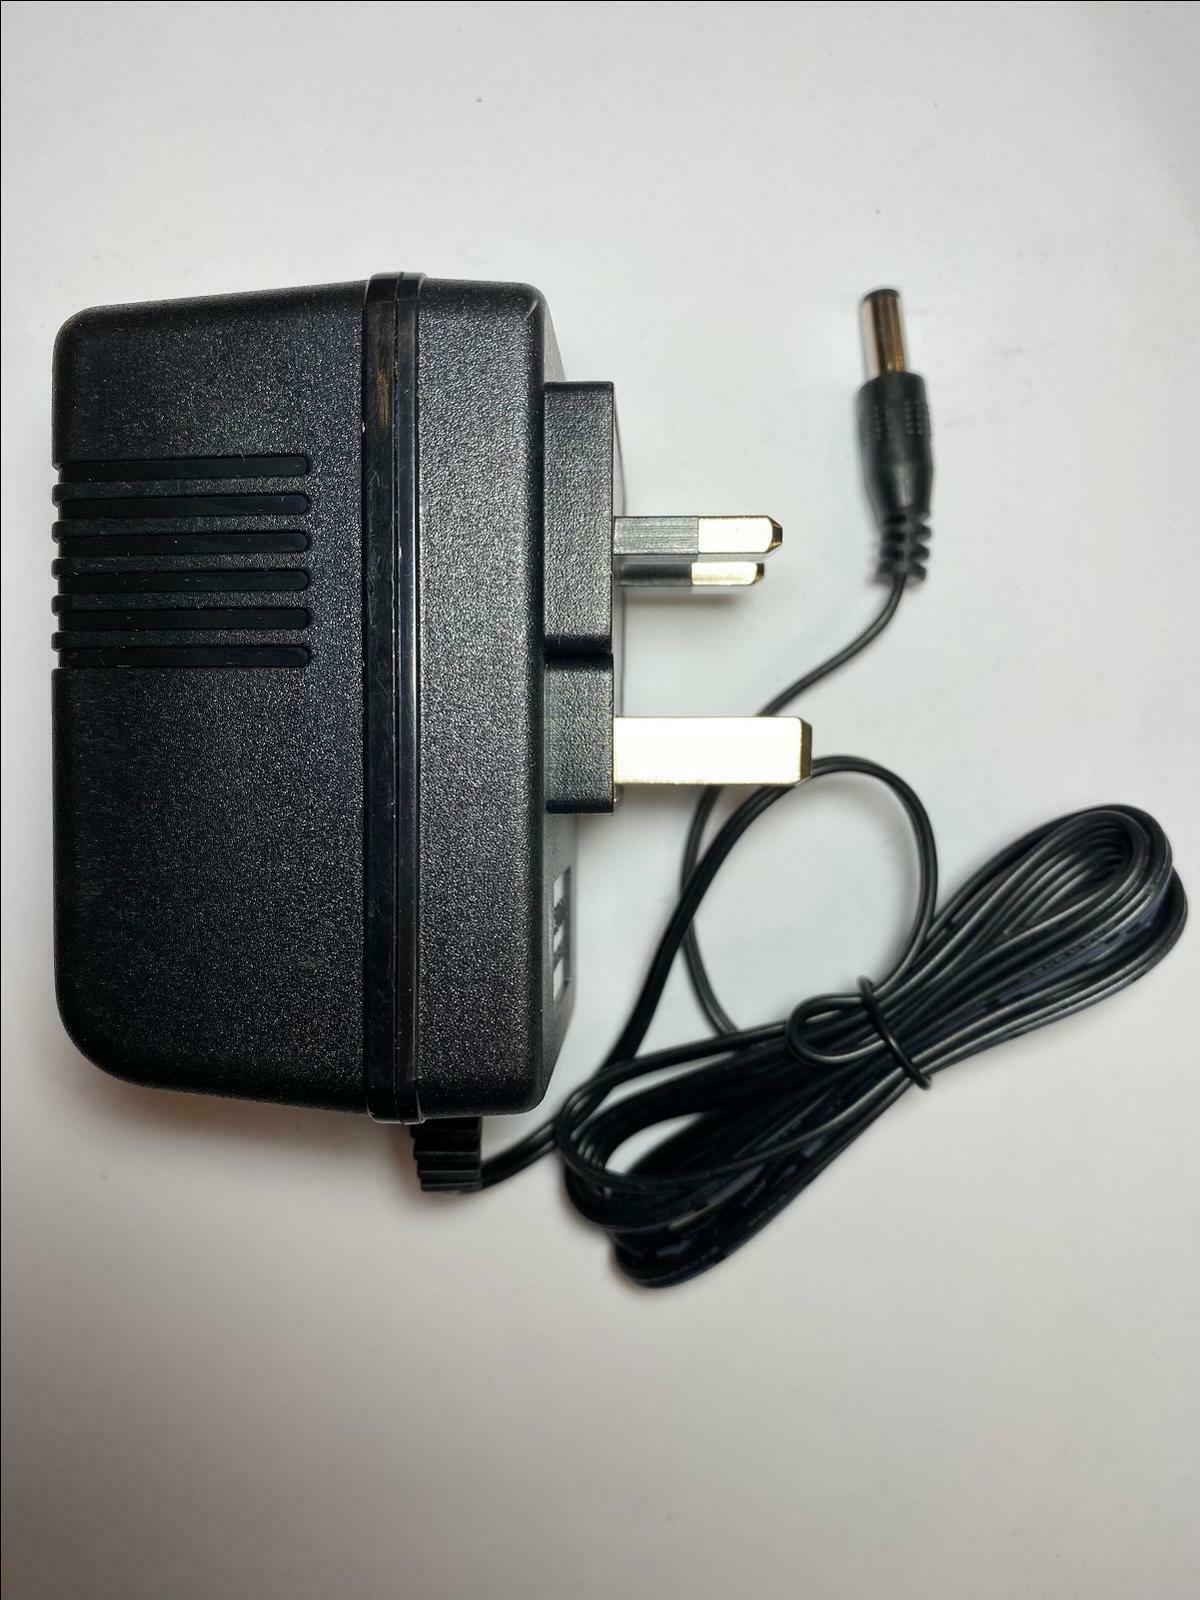 15v 5.4w EU Plug AC Power Charger Adapter W/Cable For Philips Norelco Shaver Razor HQ8505 Model: HQ8500 Type: Philips N - Click Image to Close